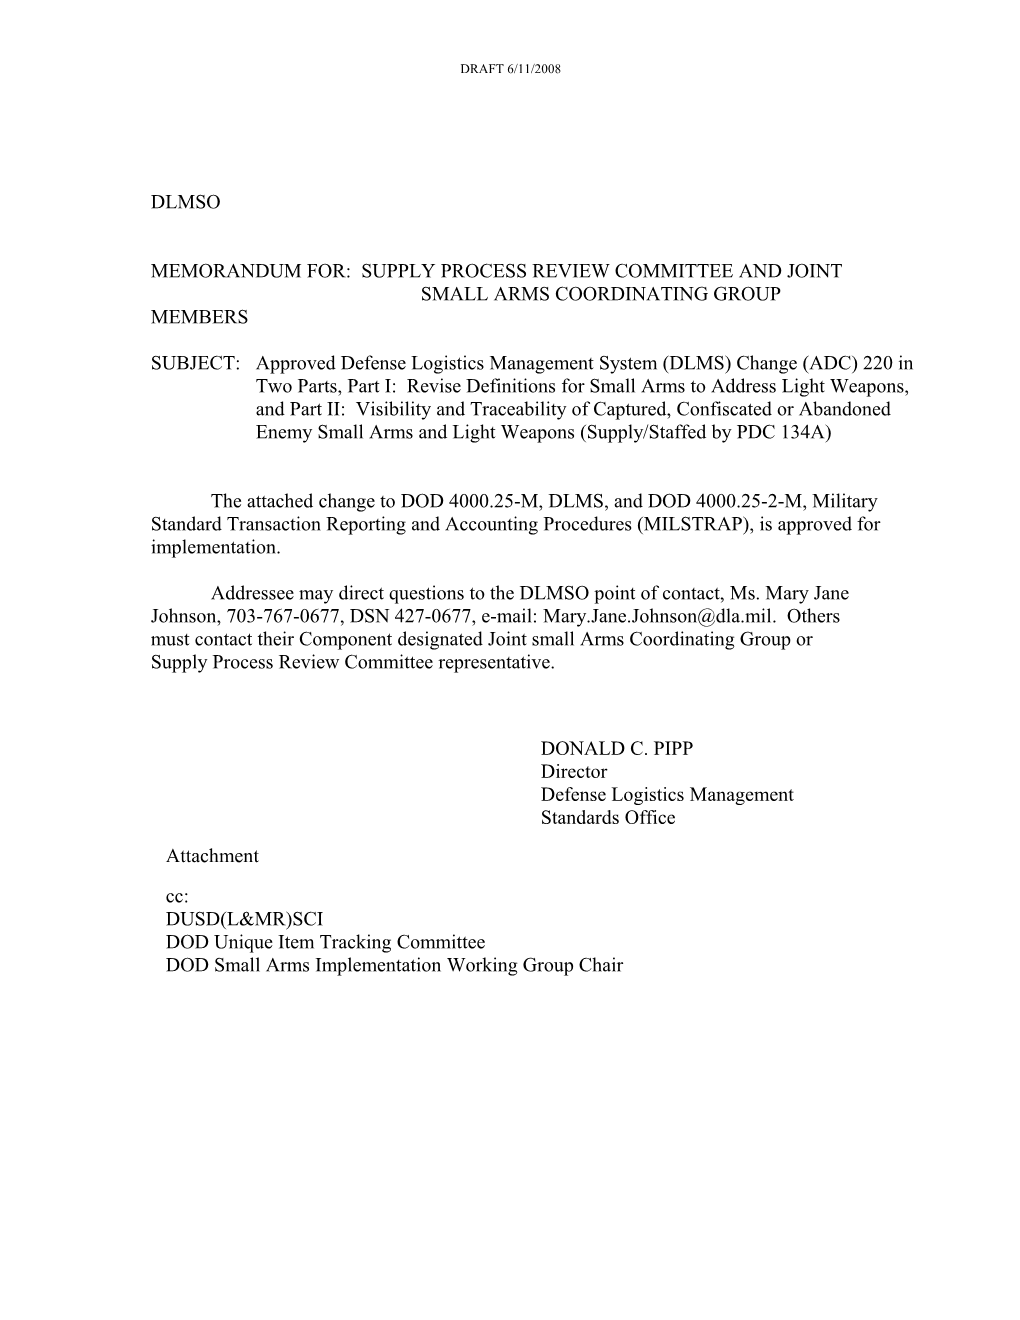 Memorandum For: Supply Process Review Committee and Joint Small Arms Coordinating Group Members